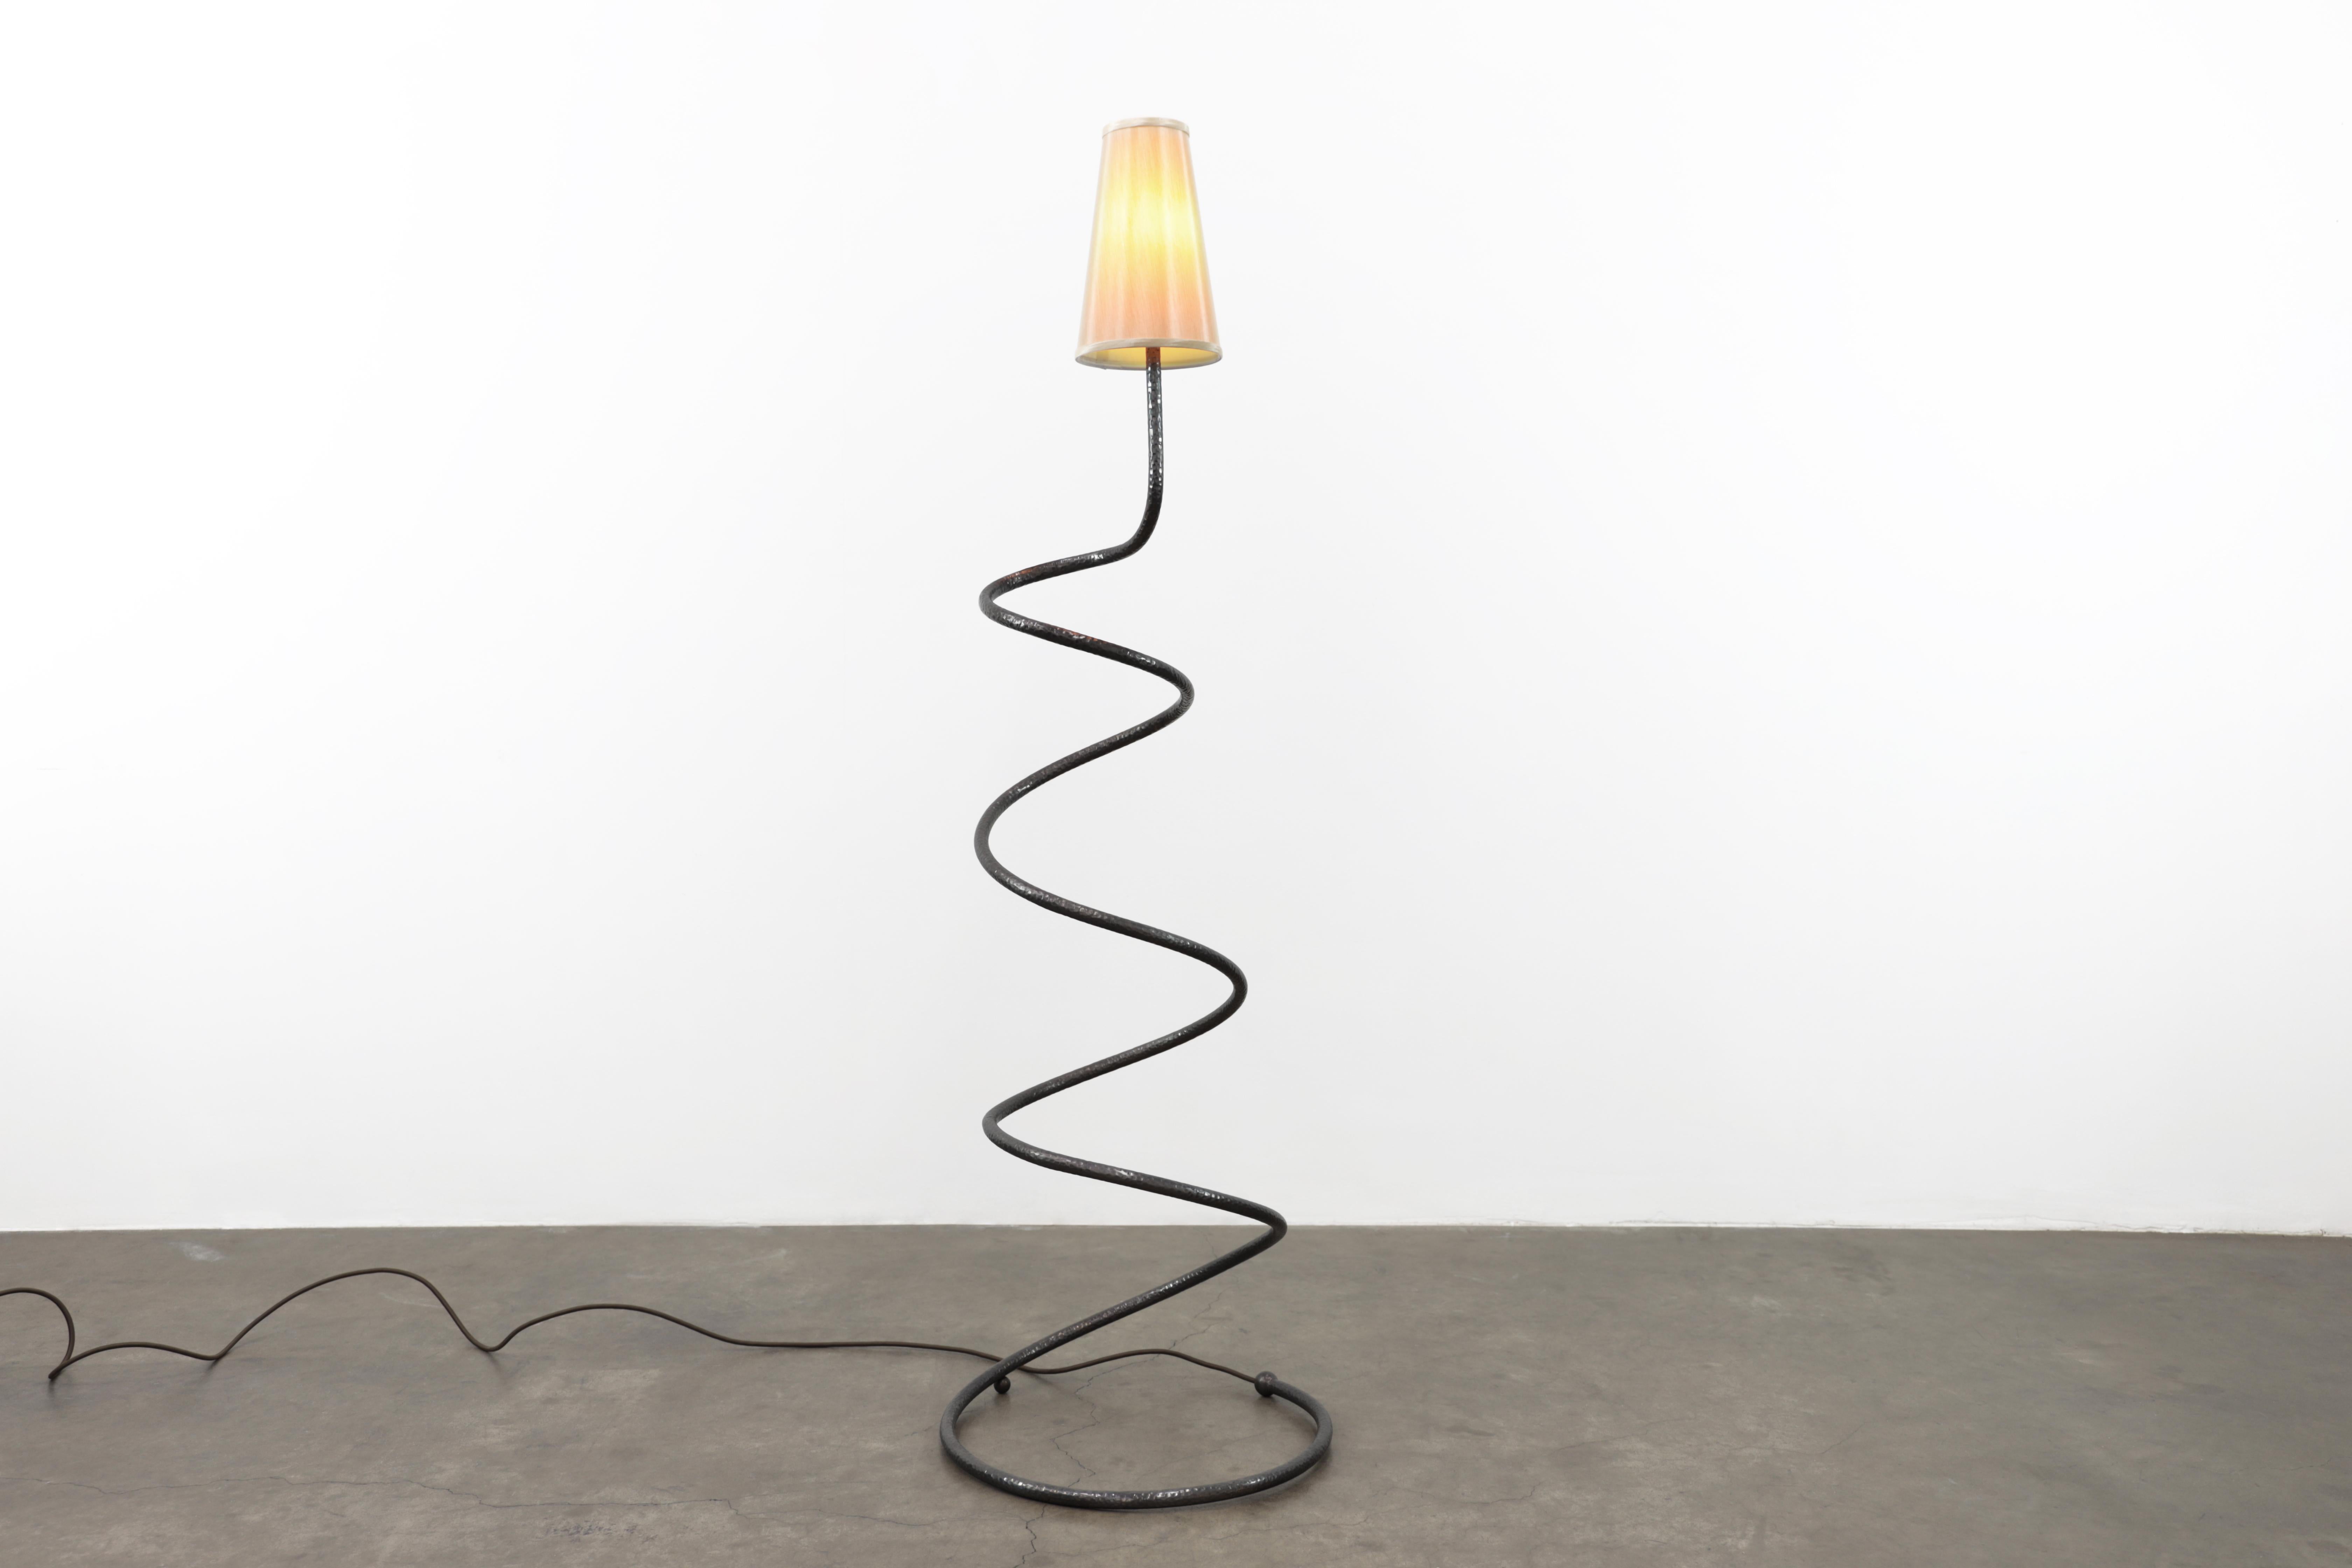 The Comet floor lamp is sure to bring joy to any environment. It's sculptural form is more than a perfect spring which makes it fun. The body of the lamp is hand hammered brass in an oiled bronze patina. The lampshade is silk. There is a dimmer on